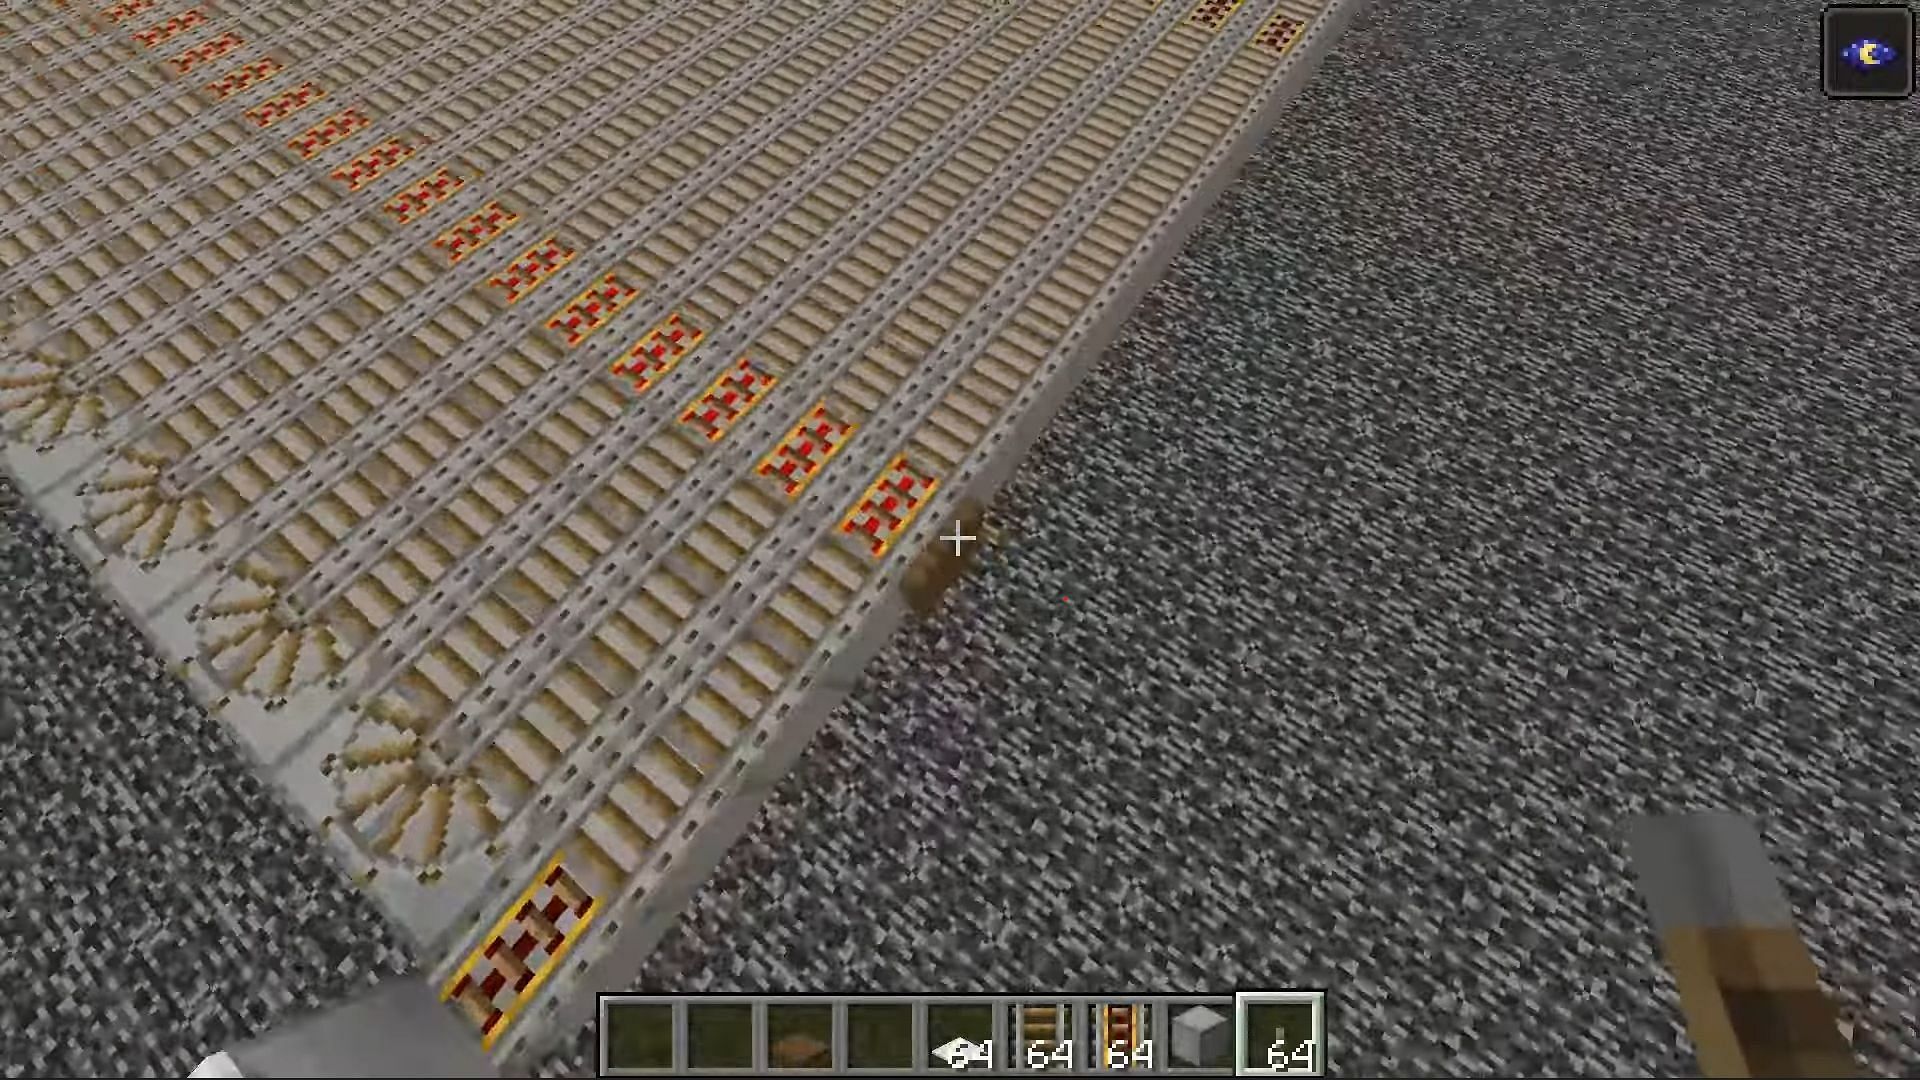 Rails and minecart for collection (Image via EasyGoingMC/YouTube)